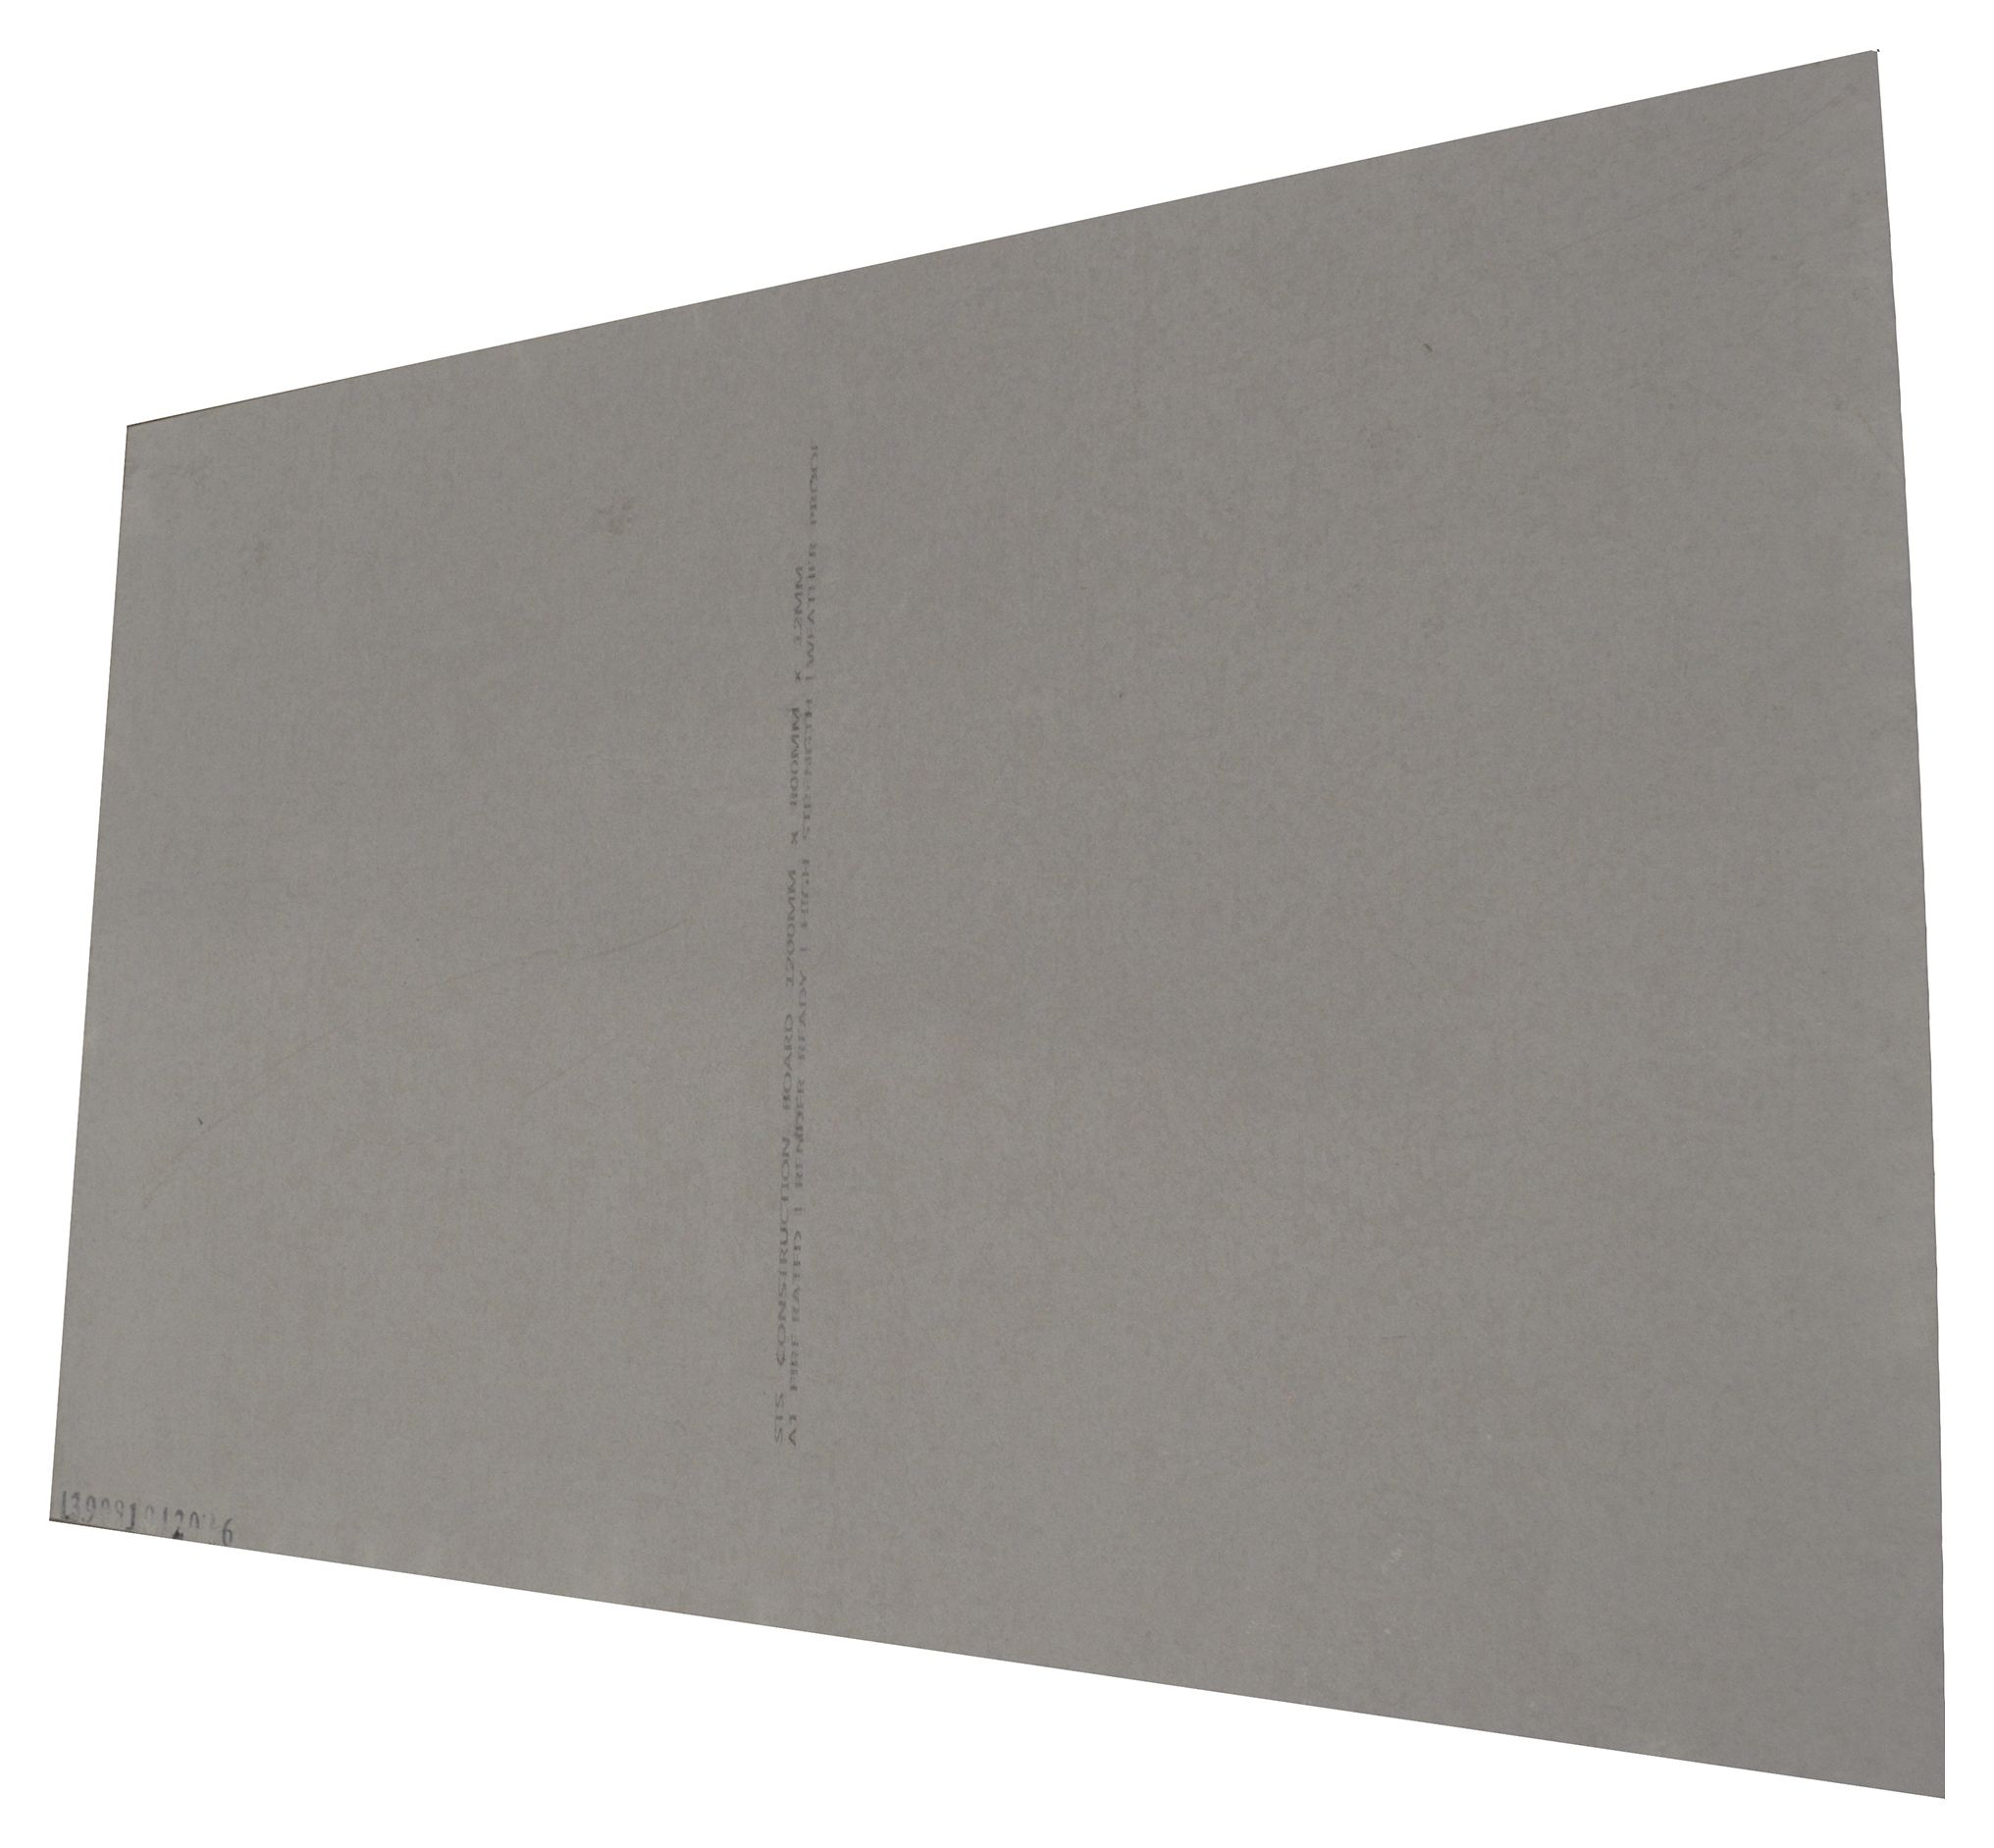 Image of STS Water Resistant Grey Fibre Cement Construction Board - 1200x800x12mm